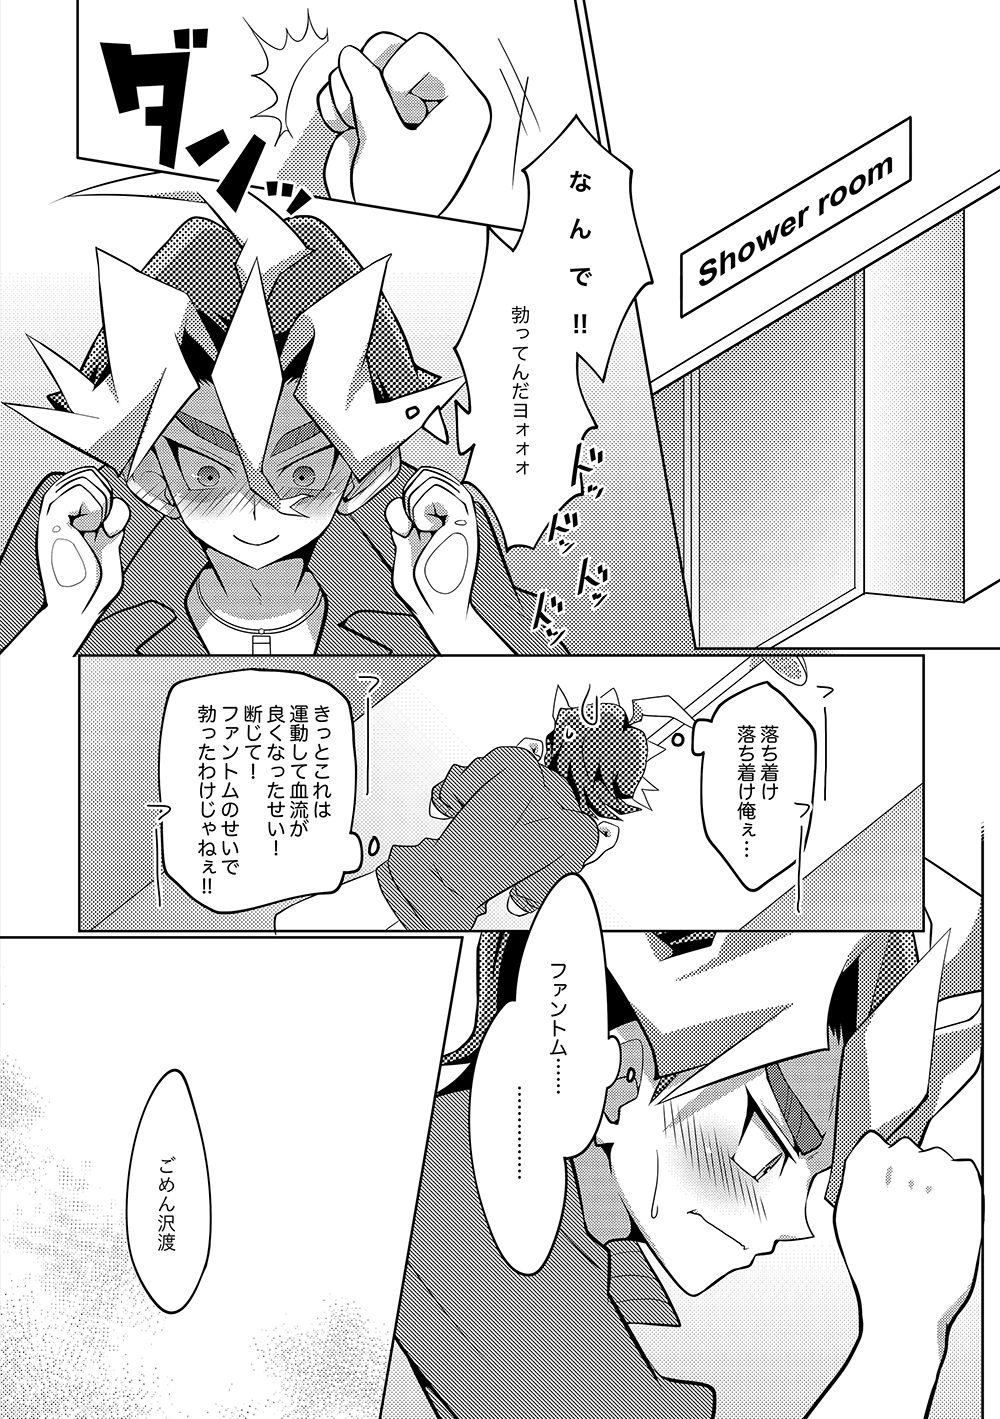 Phat SxS H! ANOTHER - Yu-gi-oh arc-v Mmd - Page 7